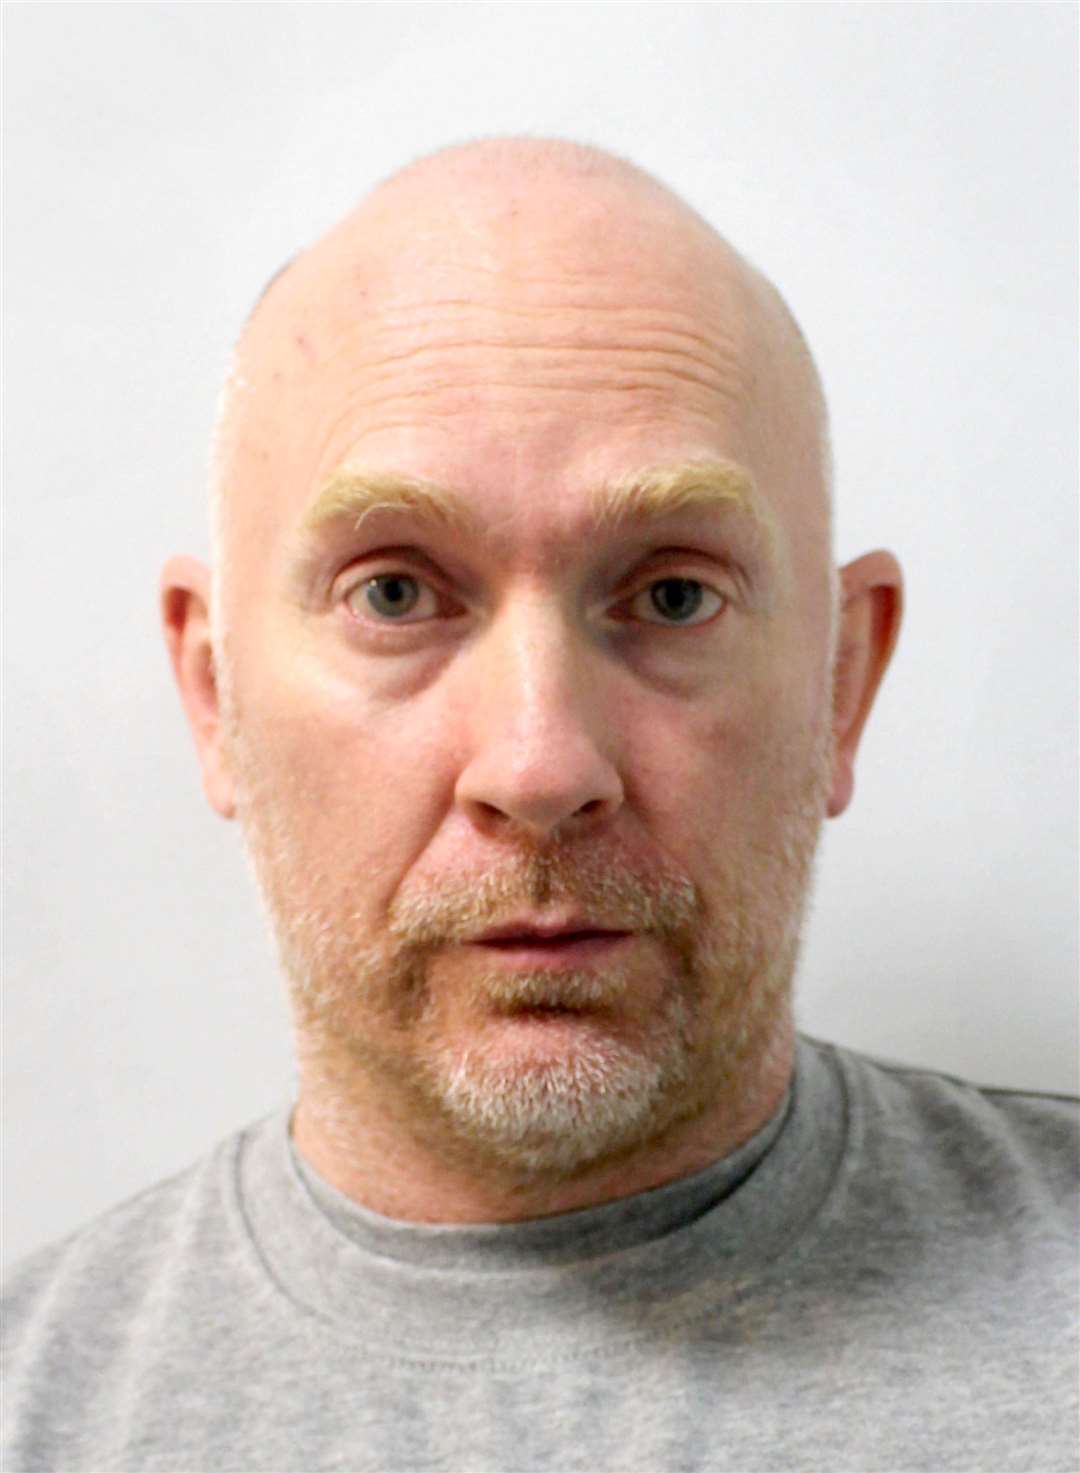 The Metropolitan Police have faced criticism over a series of scandals including how killer Wayne Couzens remained an officer despite a string of alleged sexual offences (Metropolitan Police/PA)